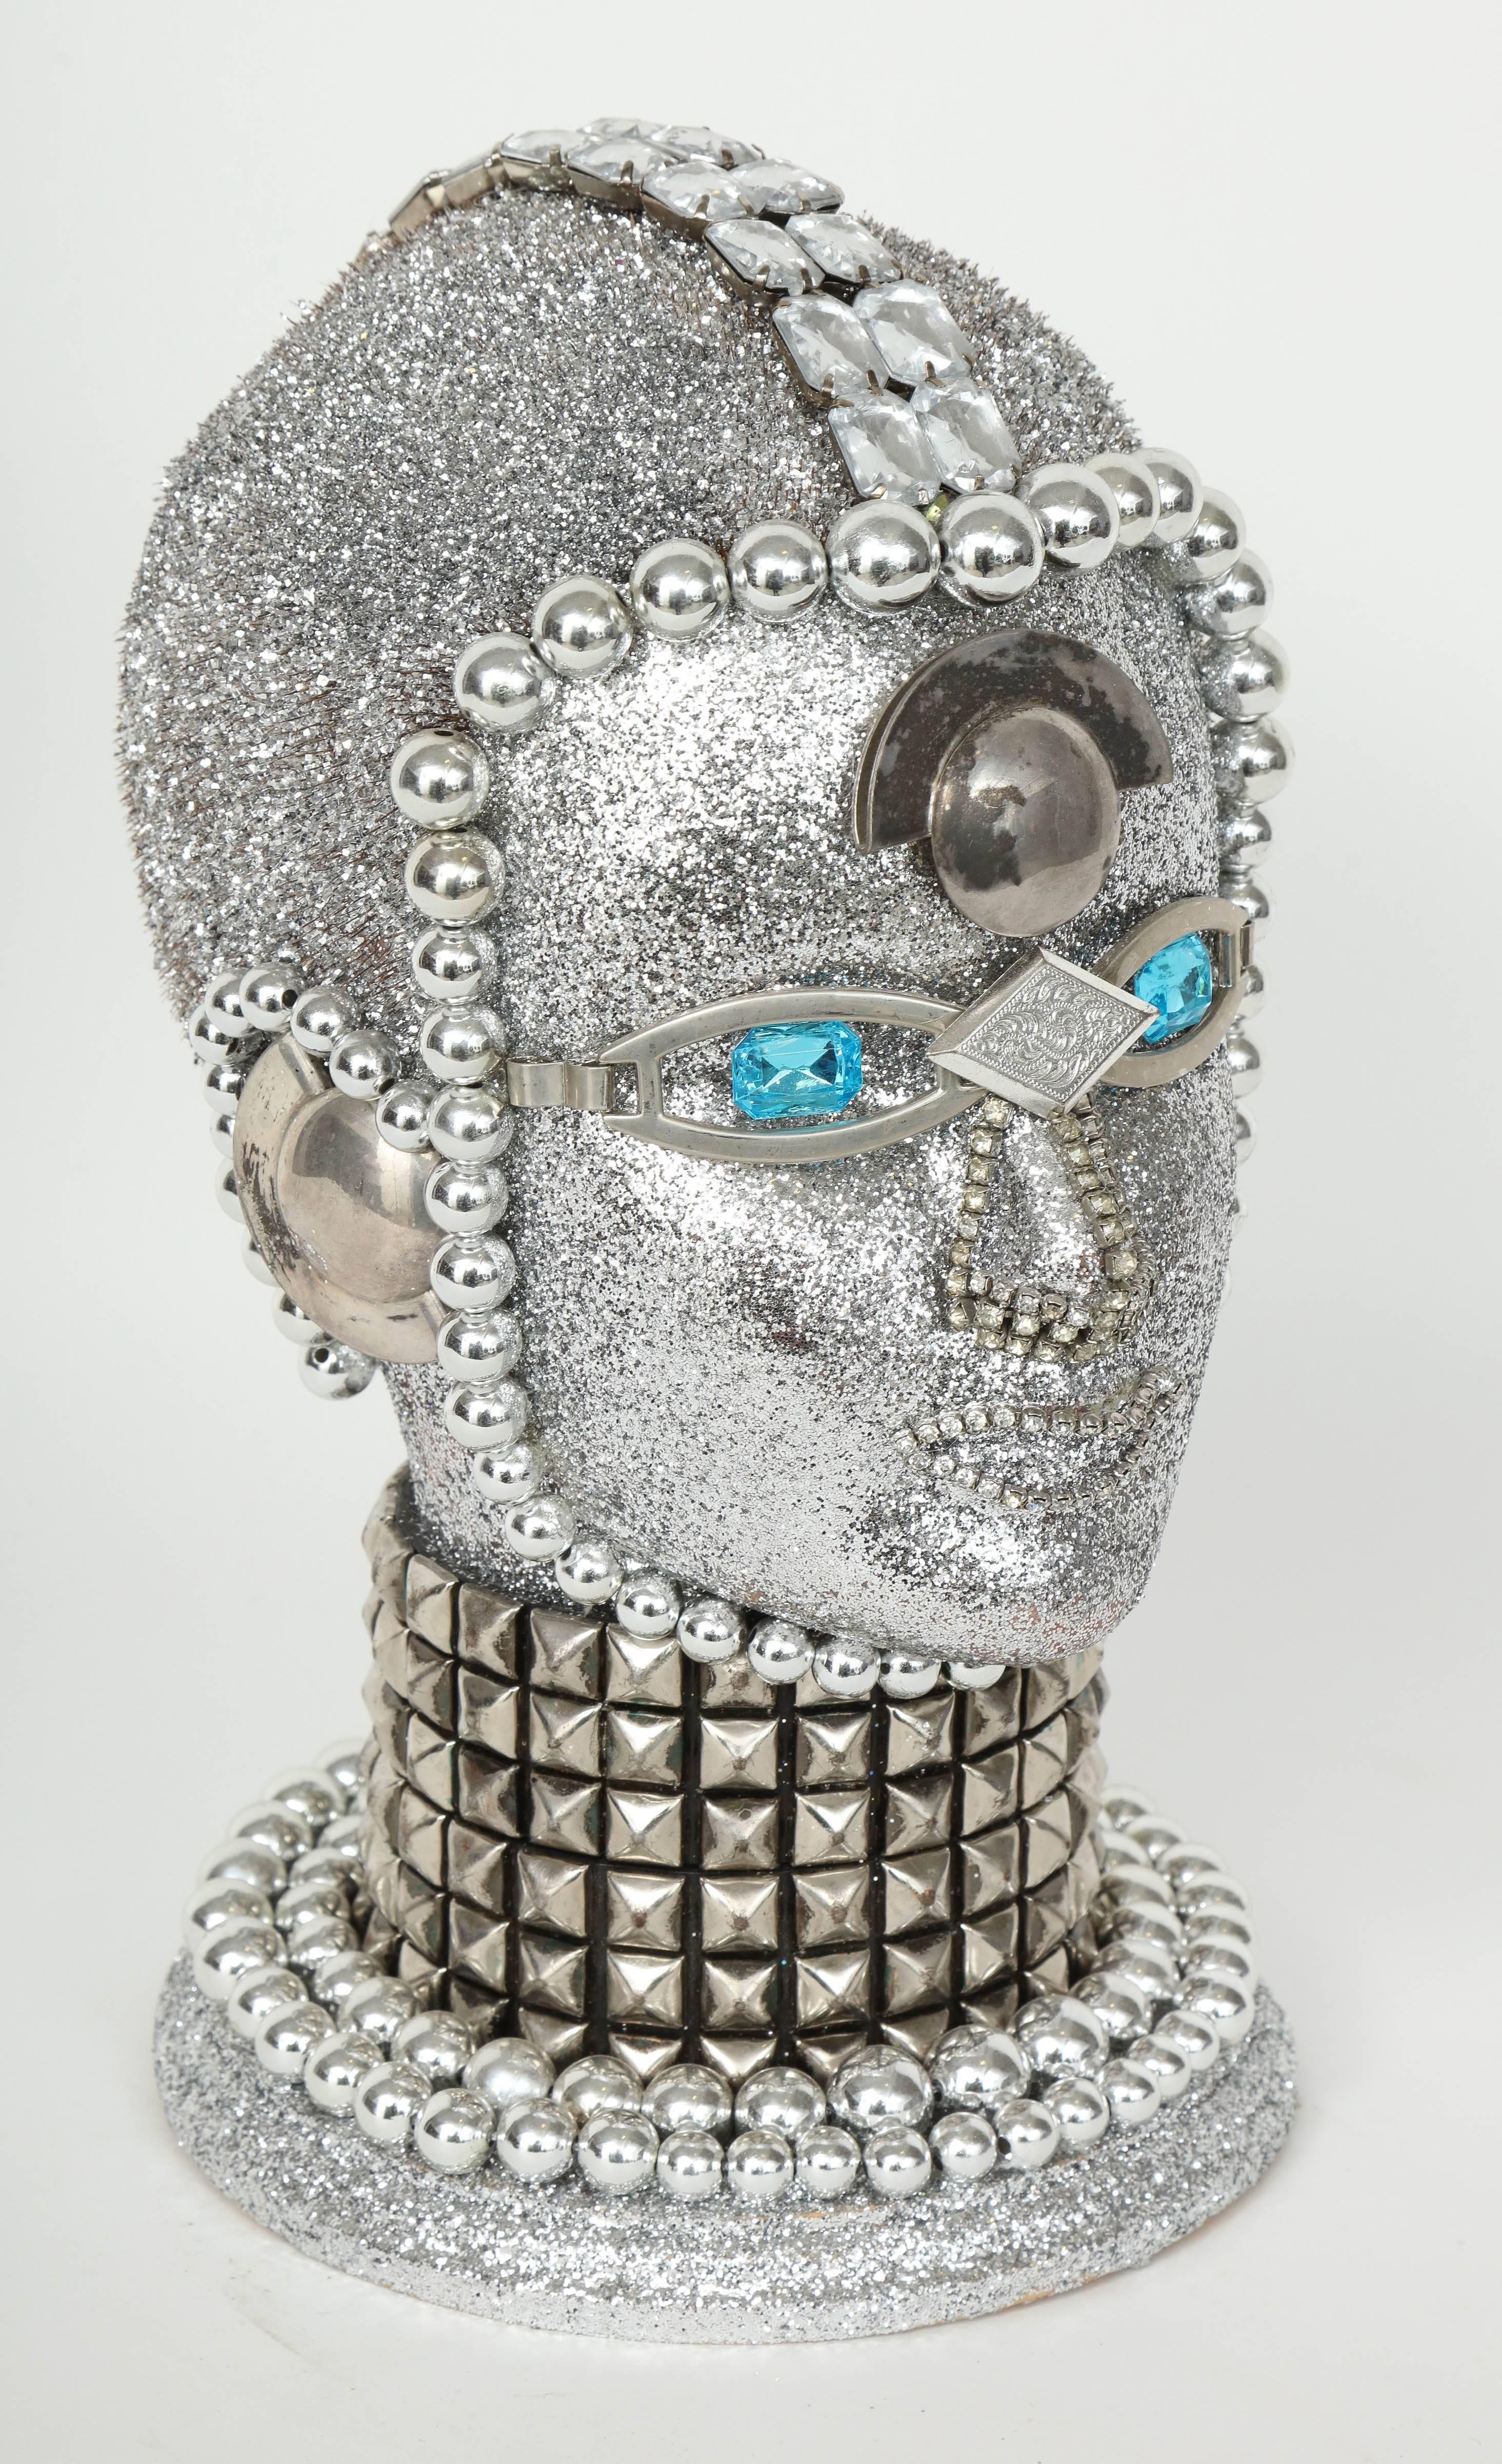 Futuristic silver metallic android bust by W. Beaupre composed of vintage jewelry findings.